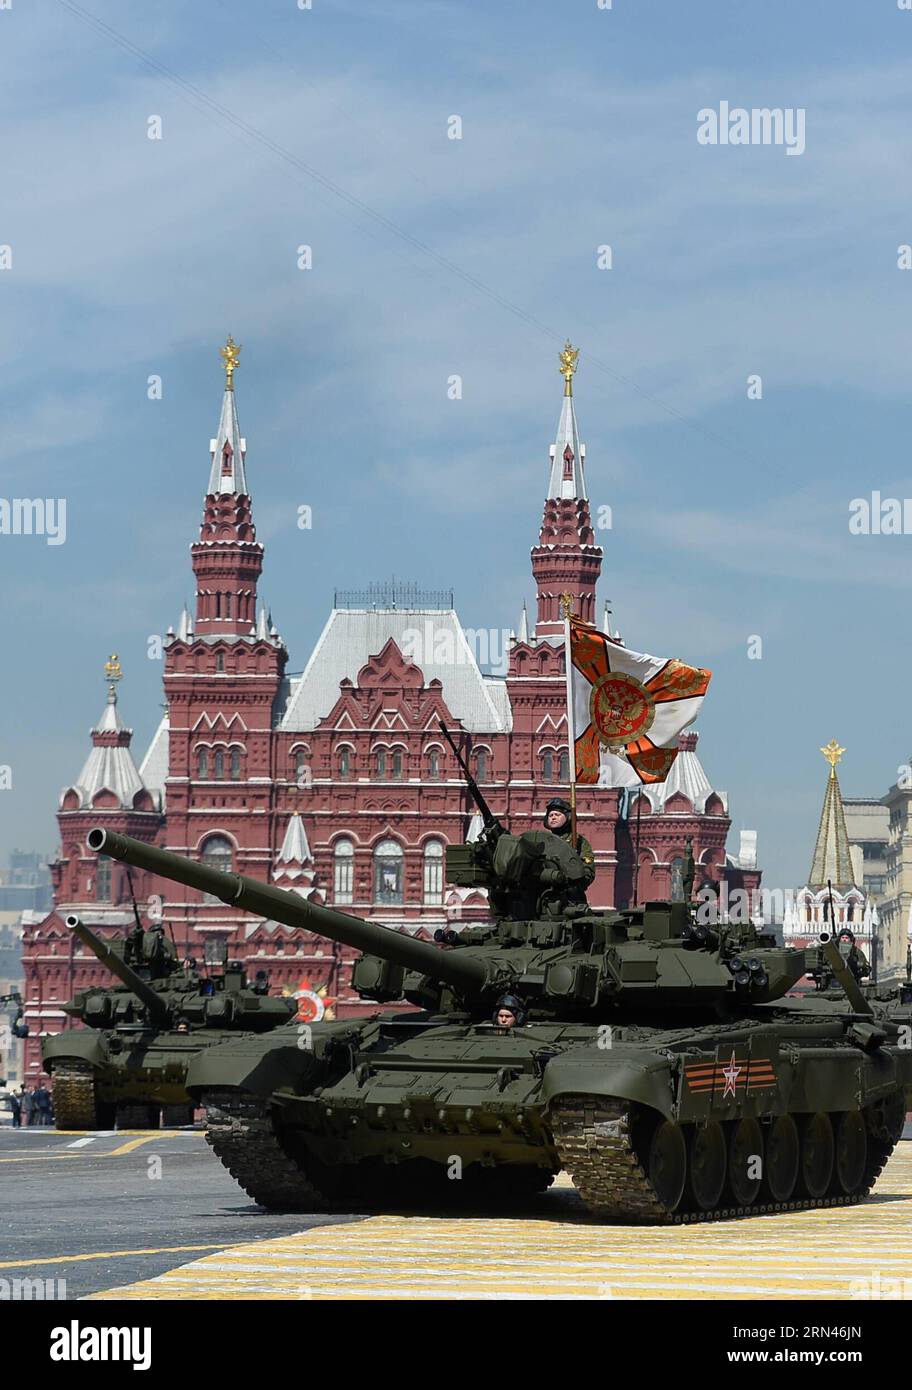 (150509) -- MOSCOW, May 9, 2015 -- T-90 tanks move across the Red Square during the military parade marking the 70th anniversary of the victory in the Great Patriotic War, in Moscow, Russia, May 9, 2015. ) (wjq) RUSSIA-MOSCOW-VICTORY DAY PARADE JiaxYuchen PUBLICATIONxNOTxINxCHN   Moscow May 9 2015 T 90 Tanks Move across The Red Square during The Military Parade marking The 70th Anniversary of The Victory in The Great Patriotic was in Moscow Russia May 9 2015 wjq Russia Moscow Victory Day Parade JiaxYuchen PUBLICATIONxNOTxINxCHN Stock Photo